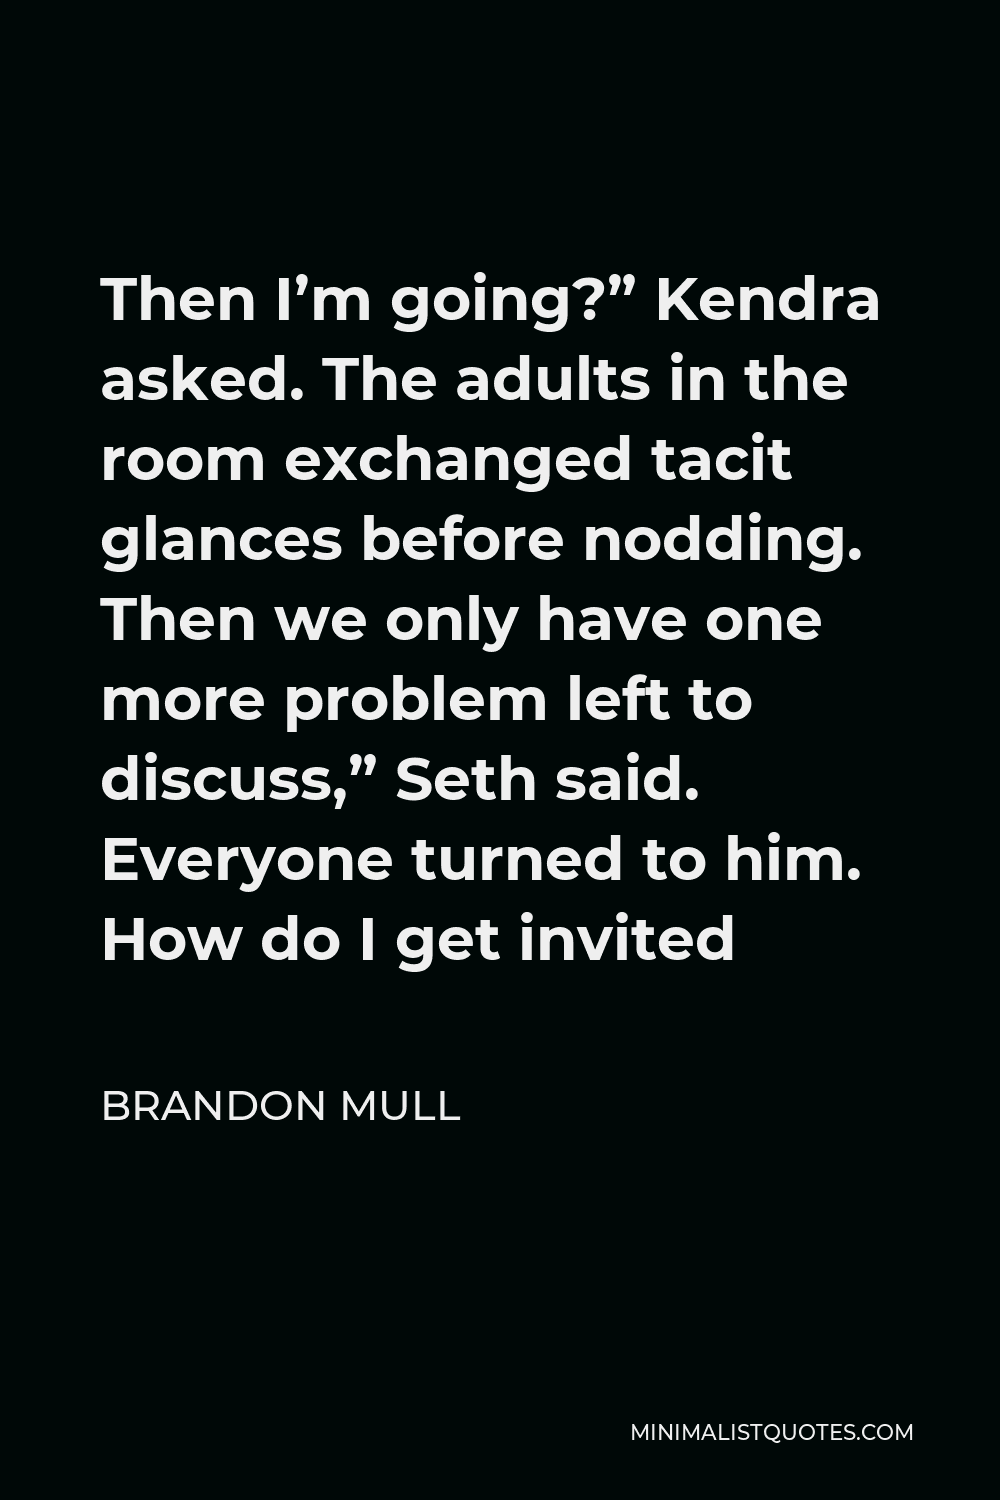 Brandon Mull Quote - Then I’m going?” Kendra asked. The adults in the room exchanged tacit glances before nodding. Then we only have one more problem left to discuss,” Seth said. Everyone turned to him. How do I get invited